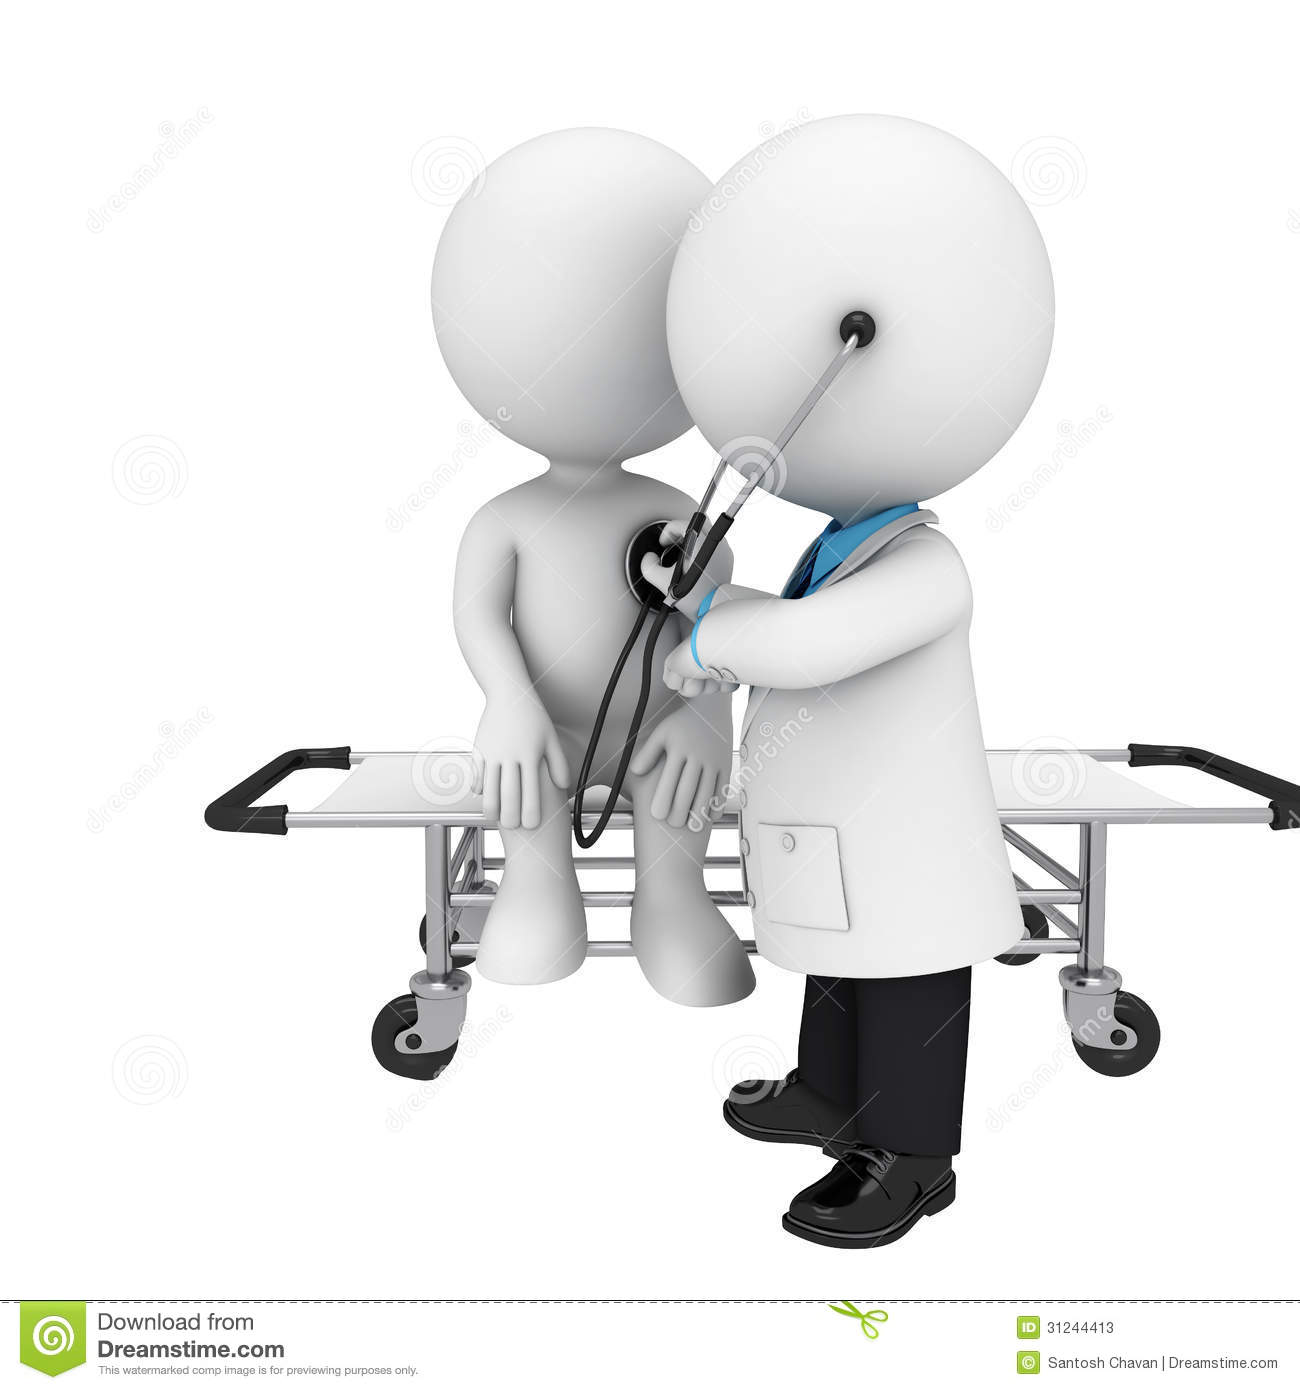 Stock Photos  3d White People As Doctor With Patient  Image  31244413